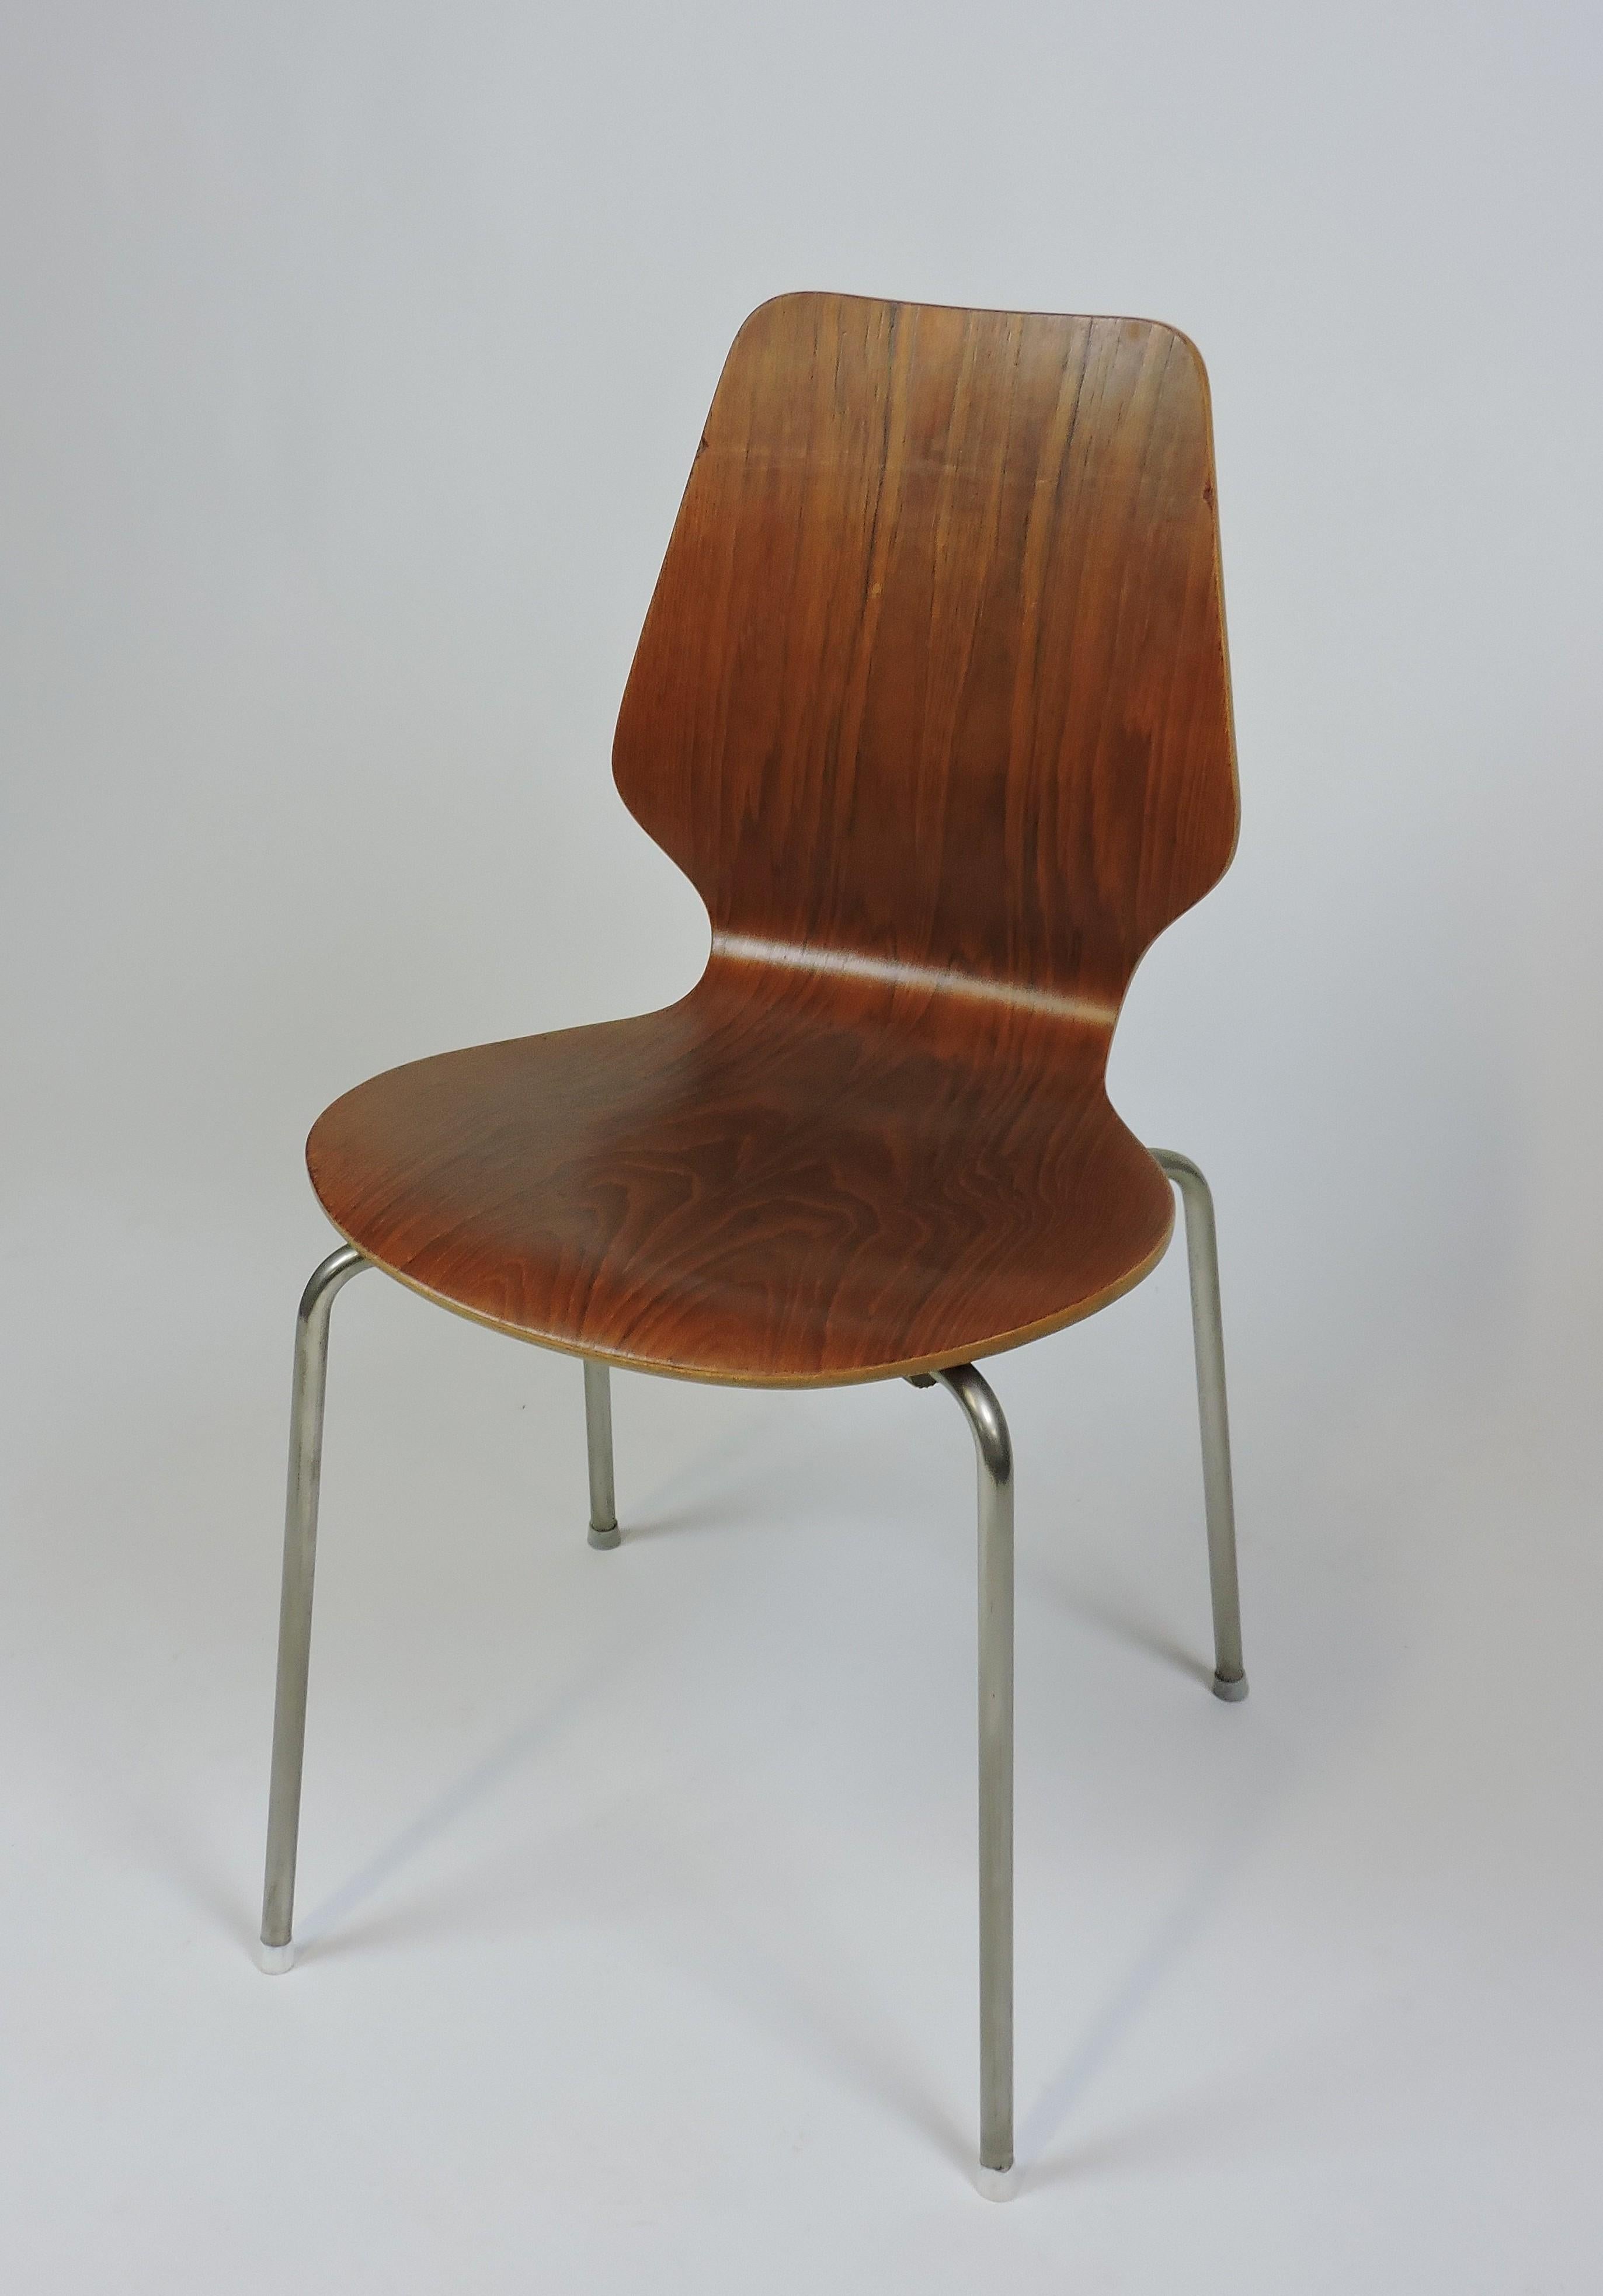 Wood Midcentury Danish Modern Bentwood Dining, Side or Desk Chair For Sale